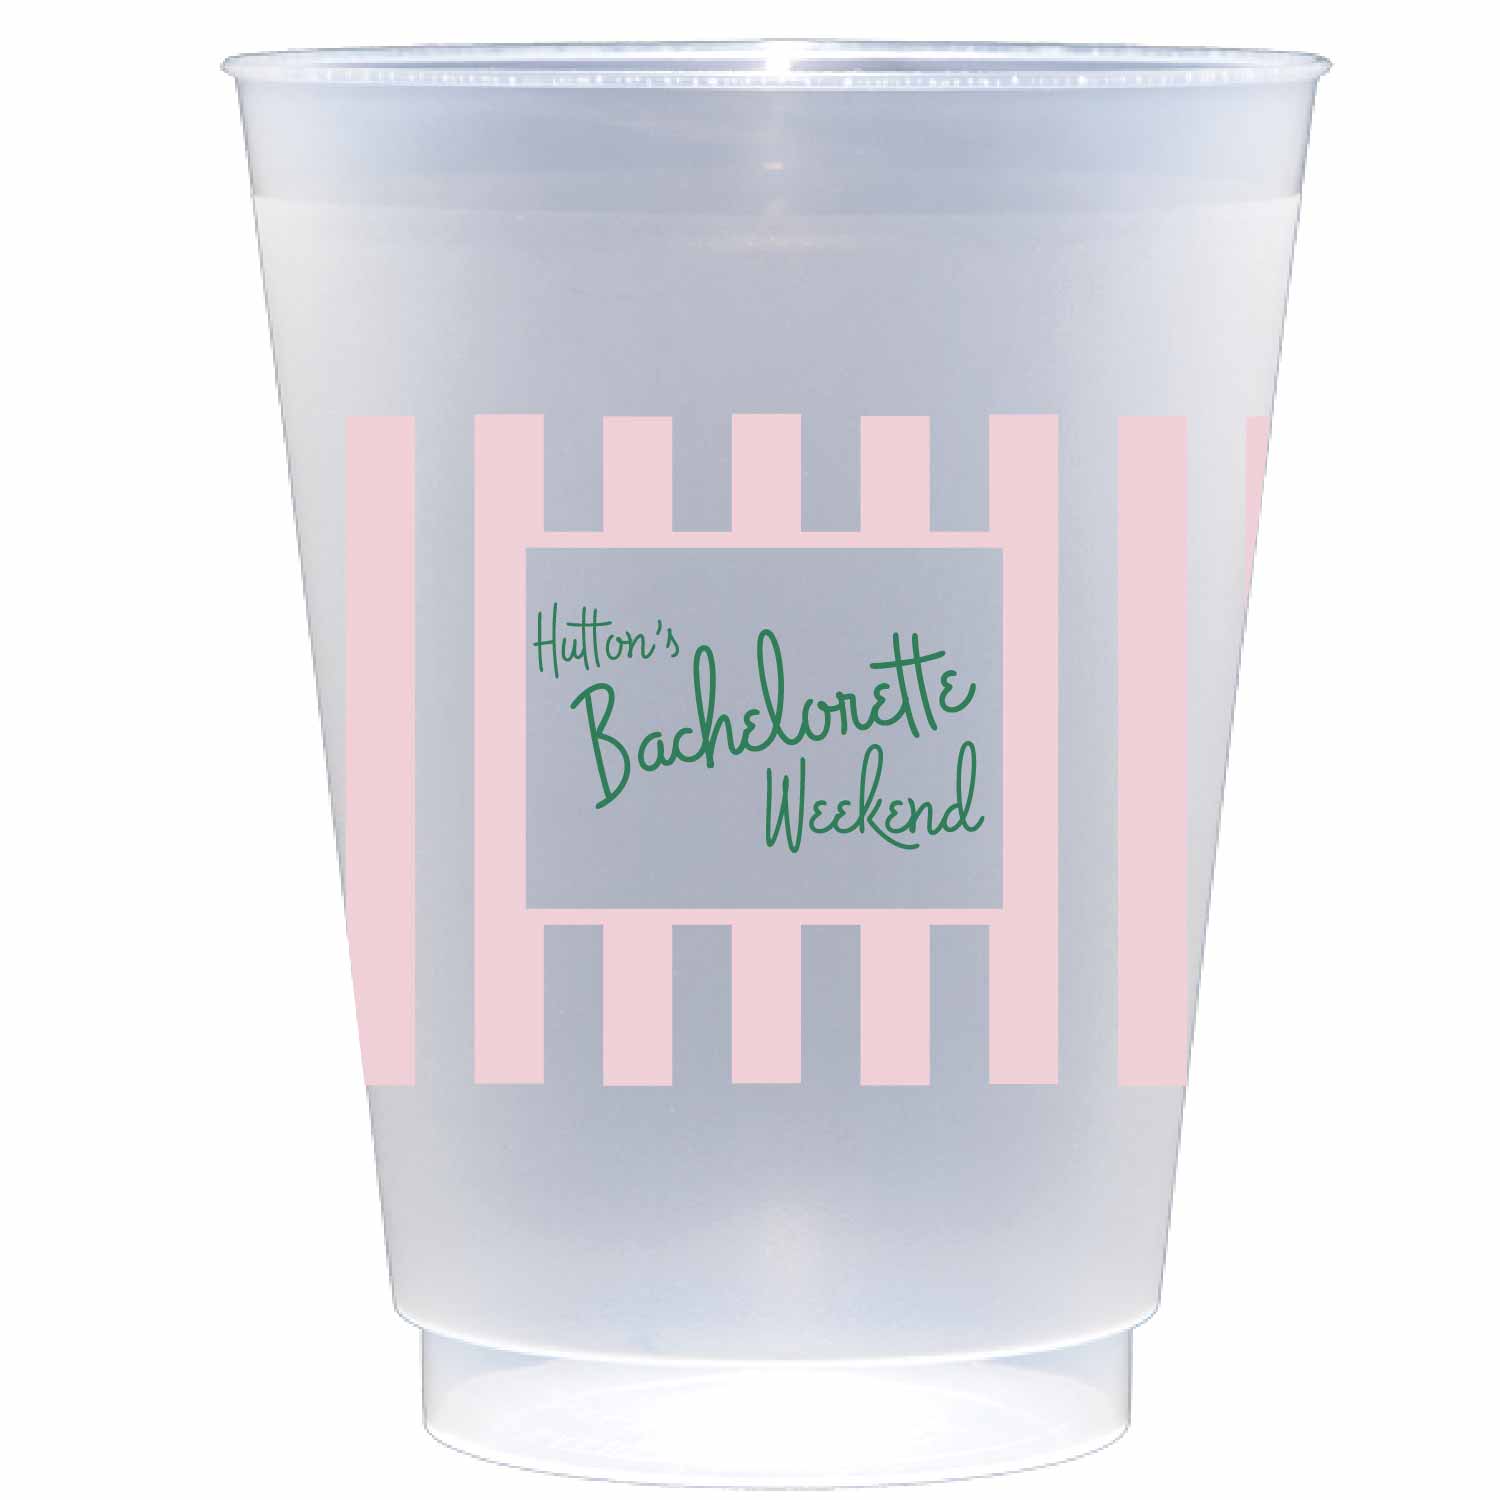 This item is unavailable -   Plastic party cups, Shatterproof